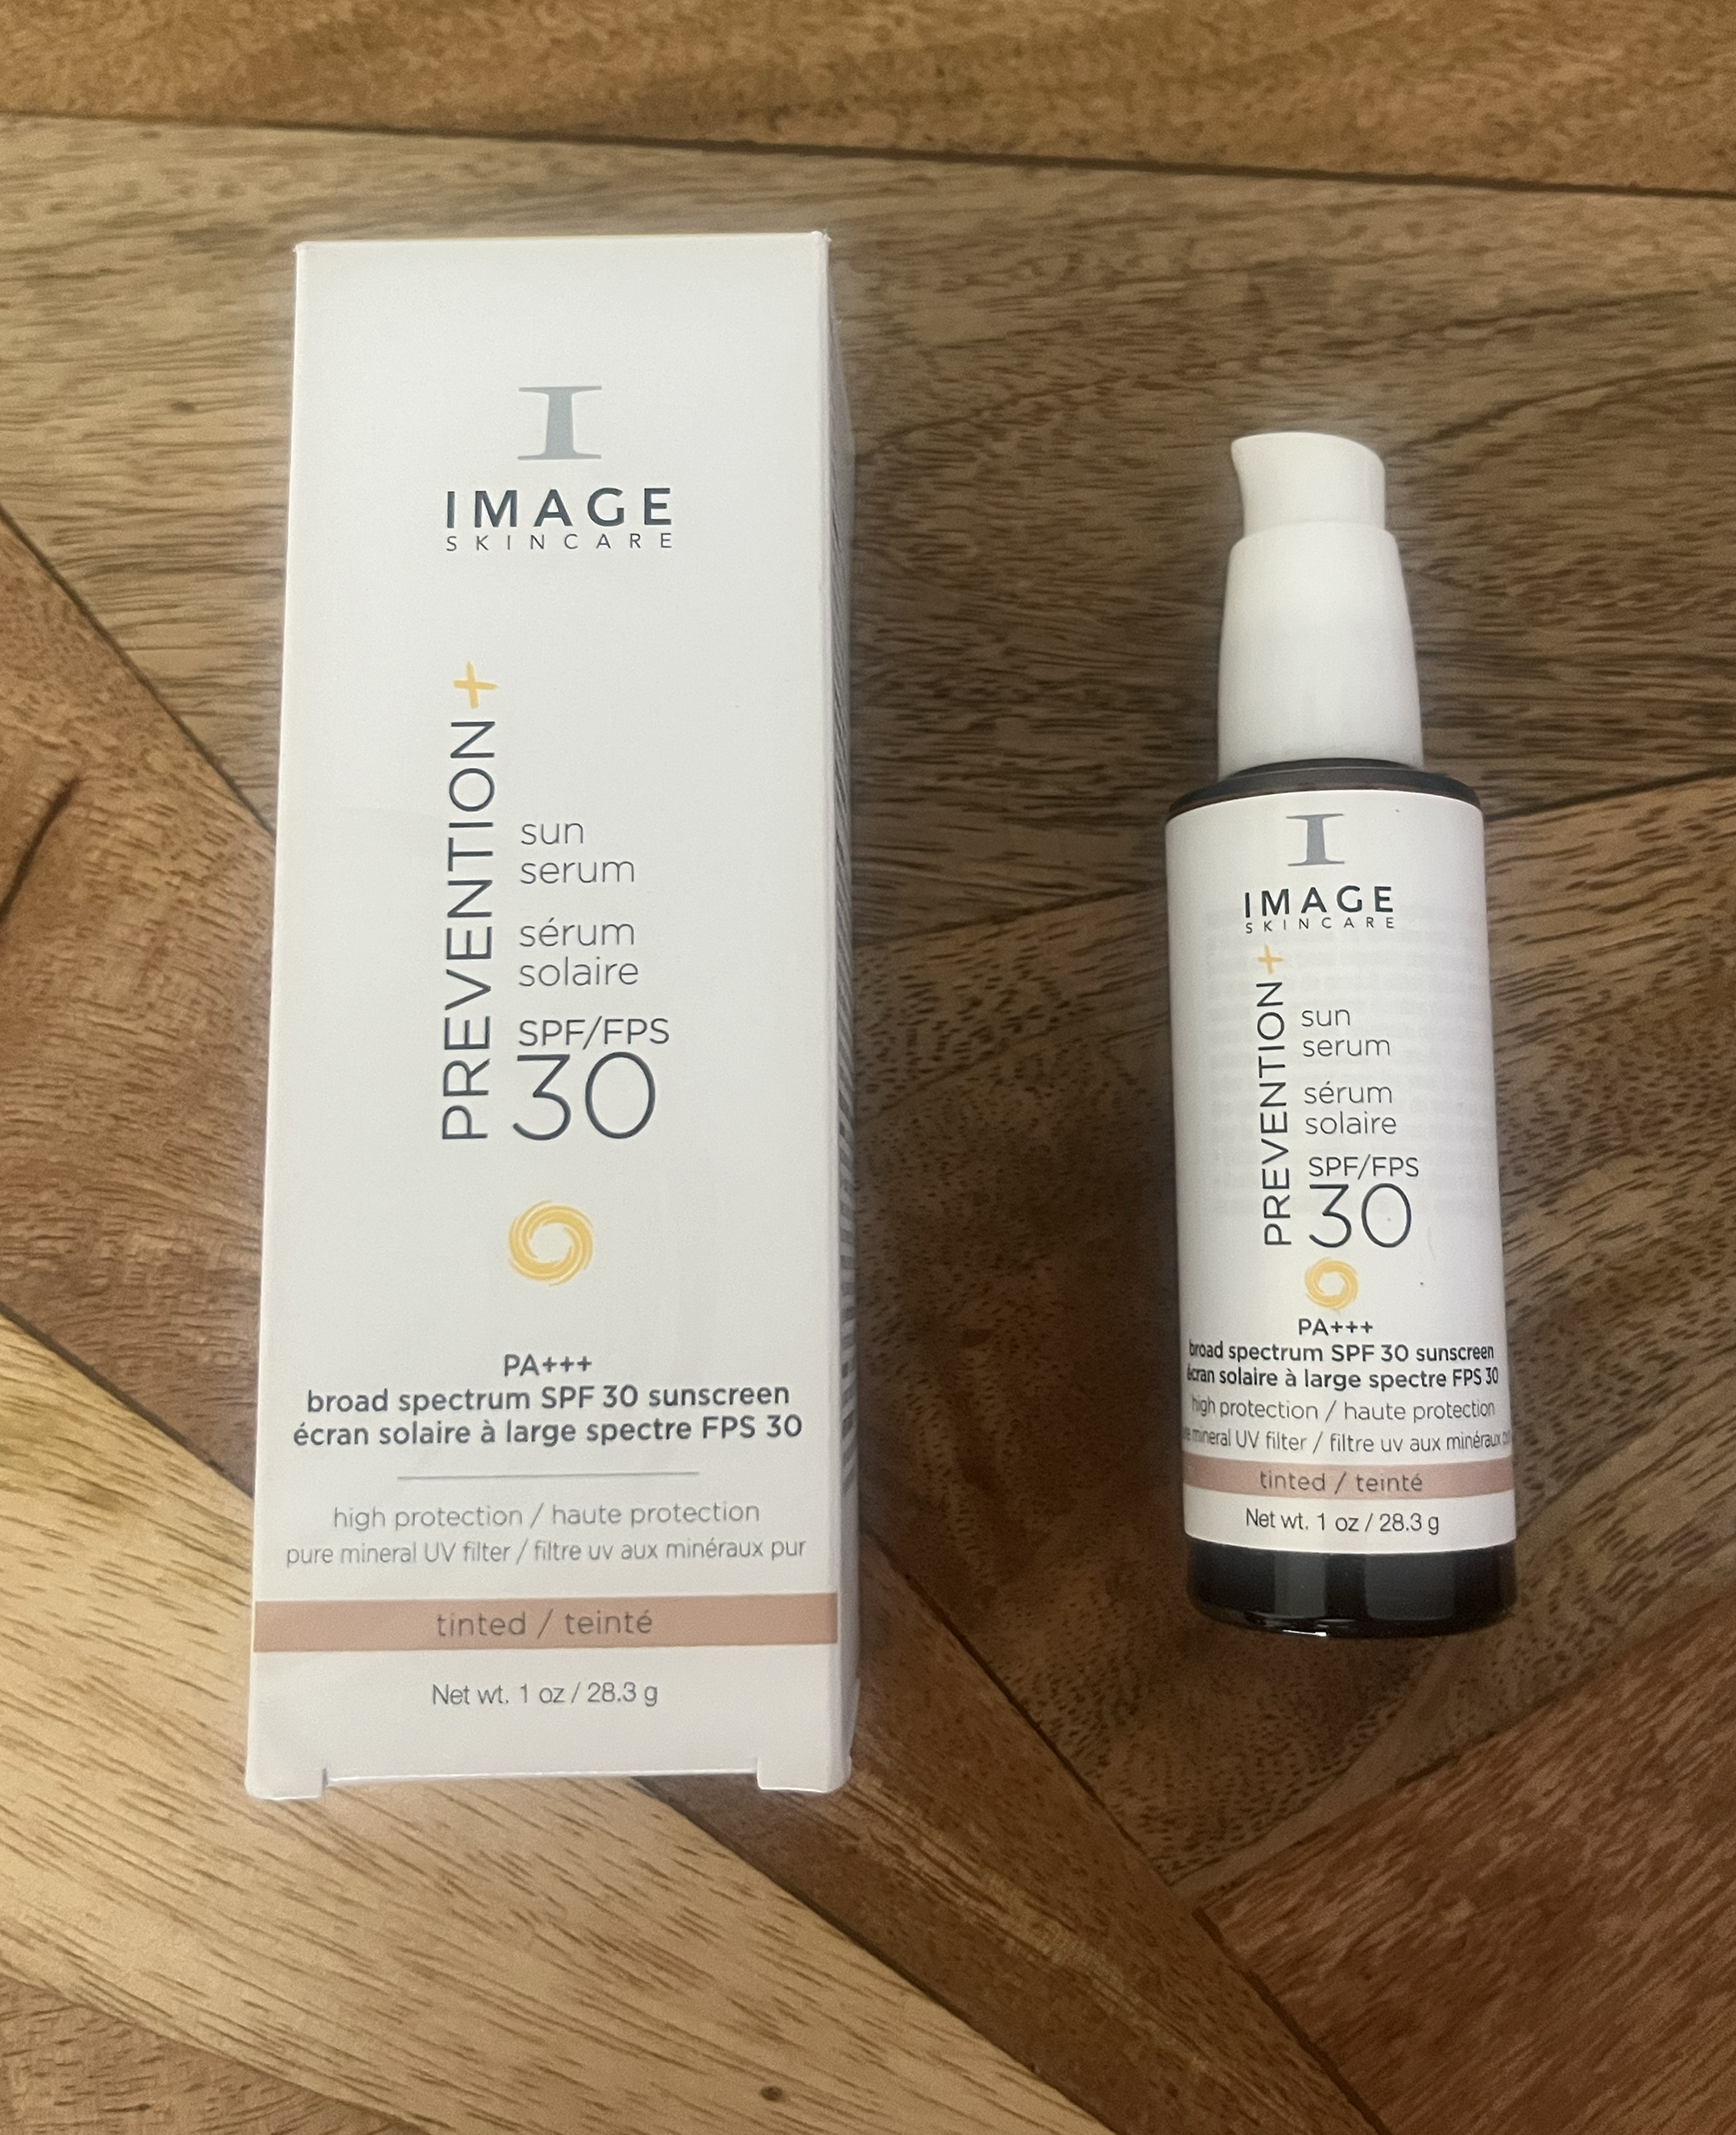 The IMAGE Skincare Prevention is a skincare and makeup hybrid.